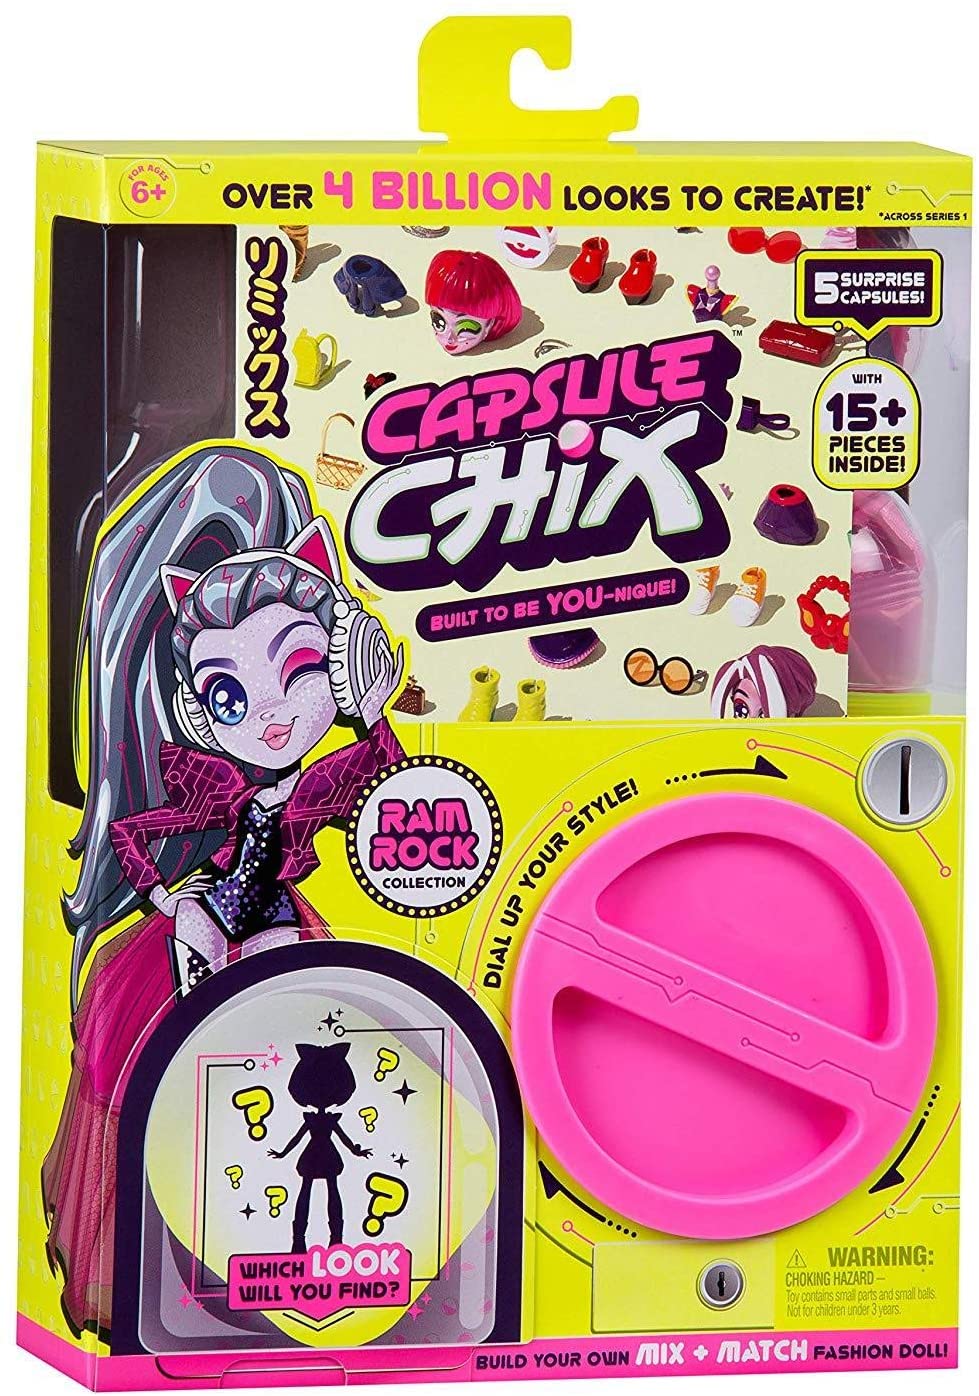 Capsule Chix Ram Rock Collection, 4.5 inch Doll with Capsule Machine Unboxing and Mix and Match Fashions and Accessories One Size